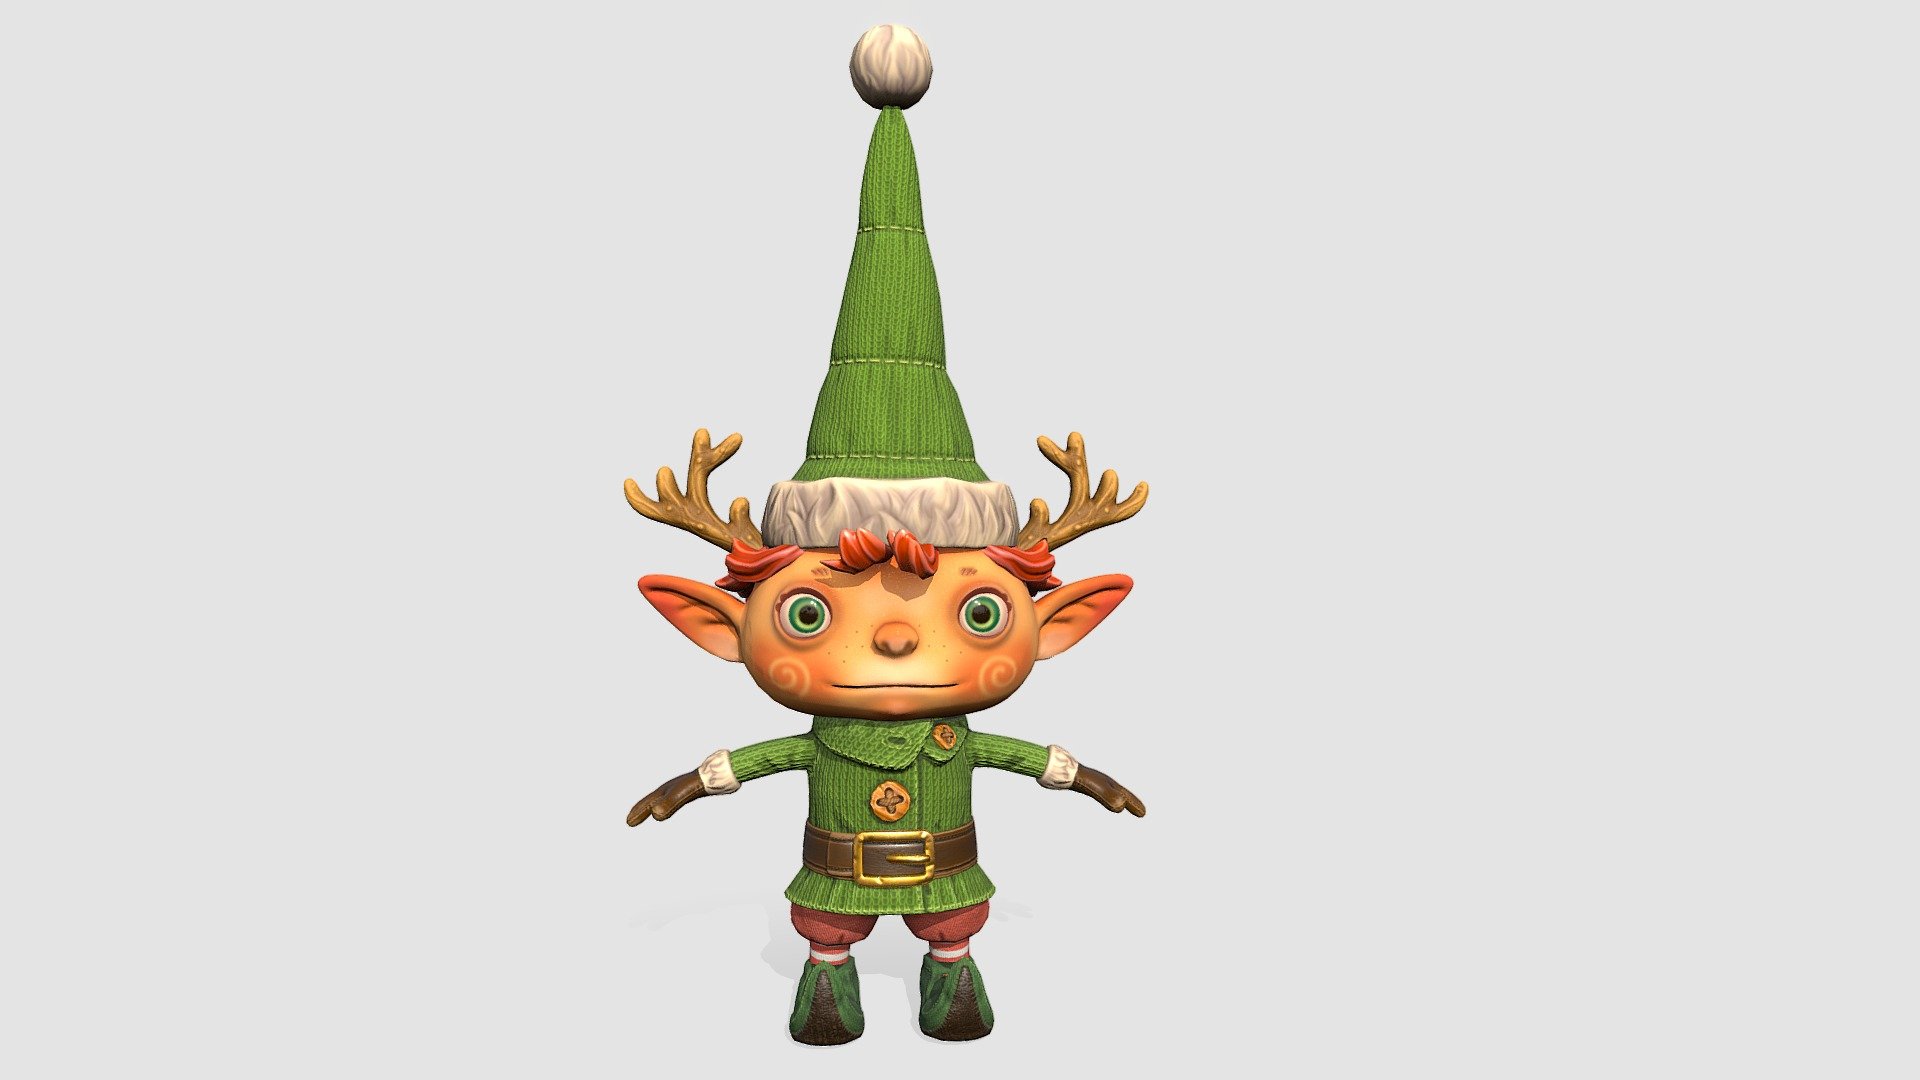 Сhristmas elf 3D model. Finished game lowpoly model with PBR Textures.

This cute character wants to be the star of your project!

Two formats are available: FBX, OBJ

PBR Maps: 2 maps x 4096x4096/png 
Normal
Albedo
Roughness
Metalness
Ao

Subdivision:
Polygons: 9 503 
Triangles: 18 905
Vertex: 10 082 - Сhristmas elf - Buy Royalty Free 3D model by Saniodesign 3d model